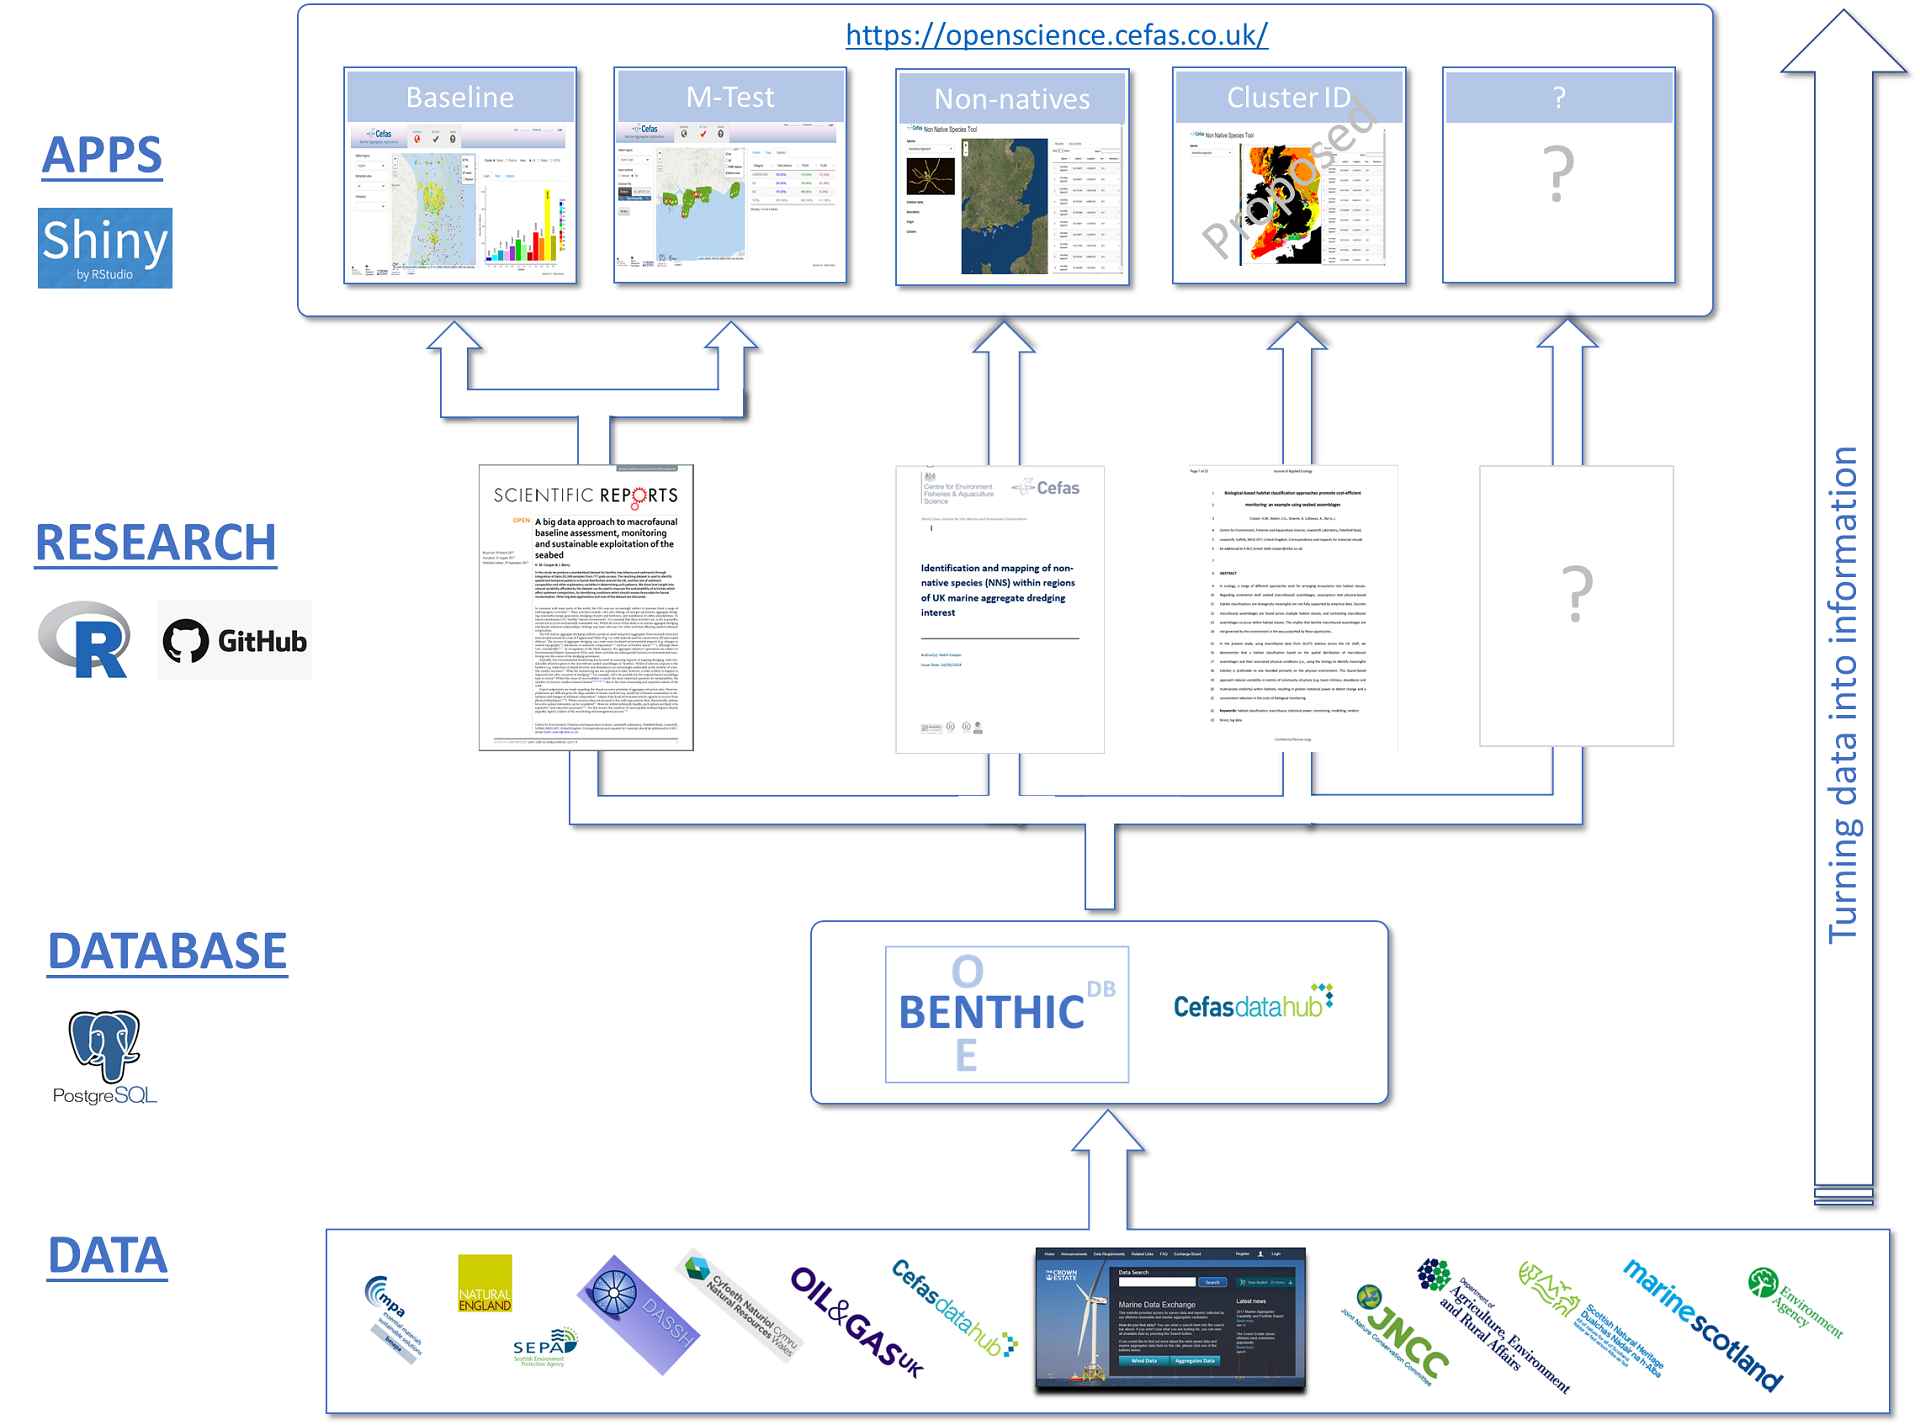 framework model for data integration from datasets to one database to research and app outputs